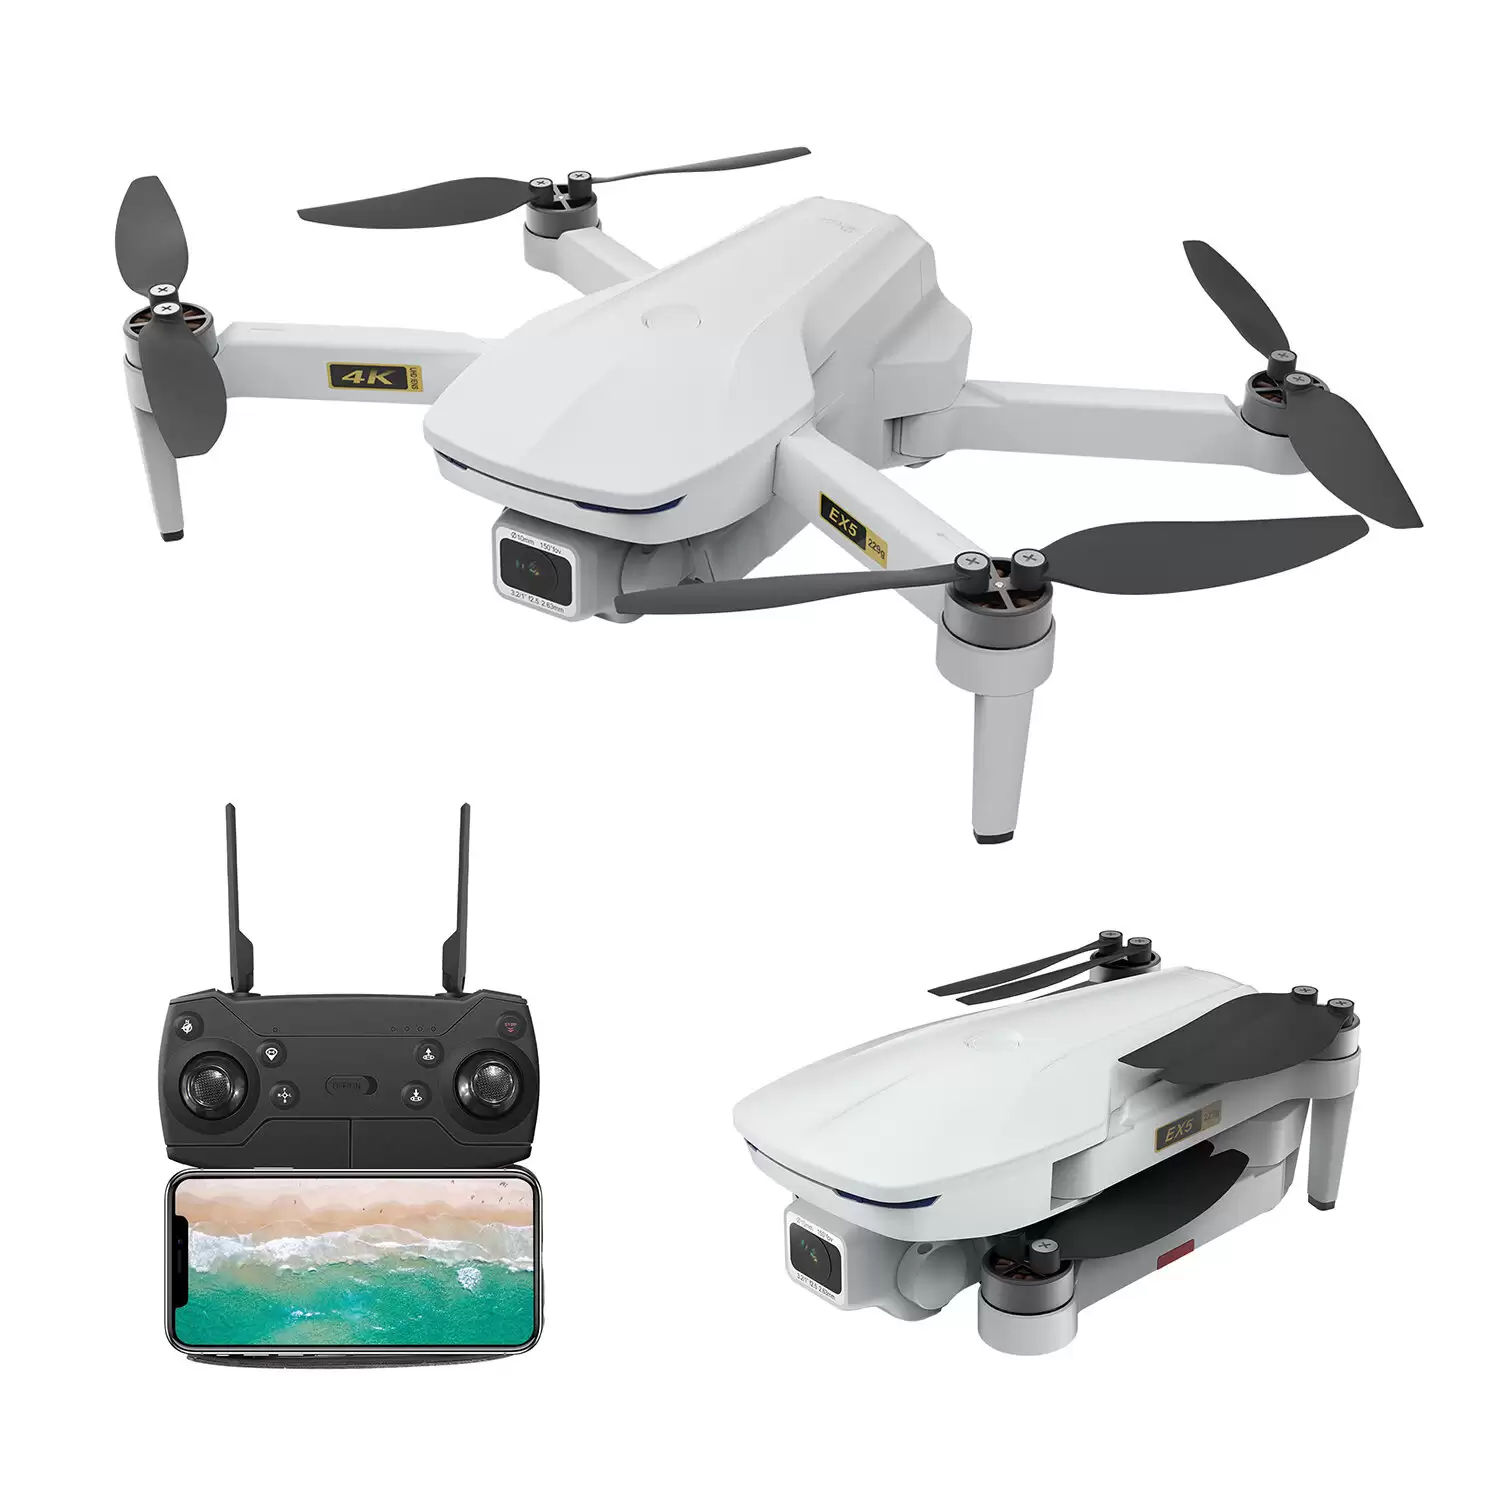 Order In Just $95.19 Eachine Ex5 5g Wifi 1km Fpv Gps With 4k Hd Camera 30mins Flight Time Optical Flow Foldable Rc Drone Quadcopter Rtf With This Coupon At Banggood